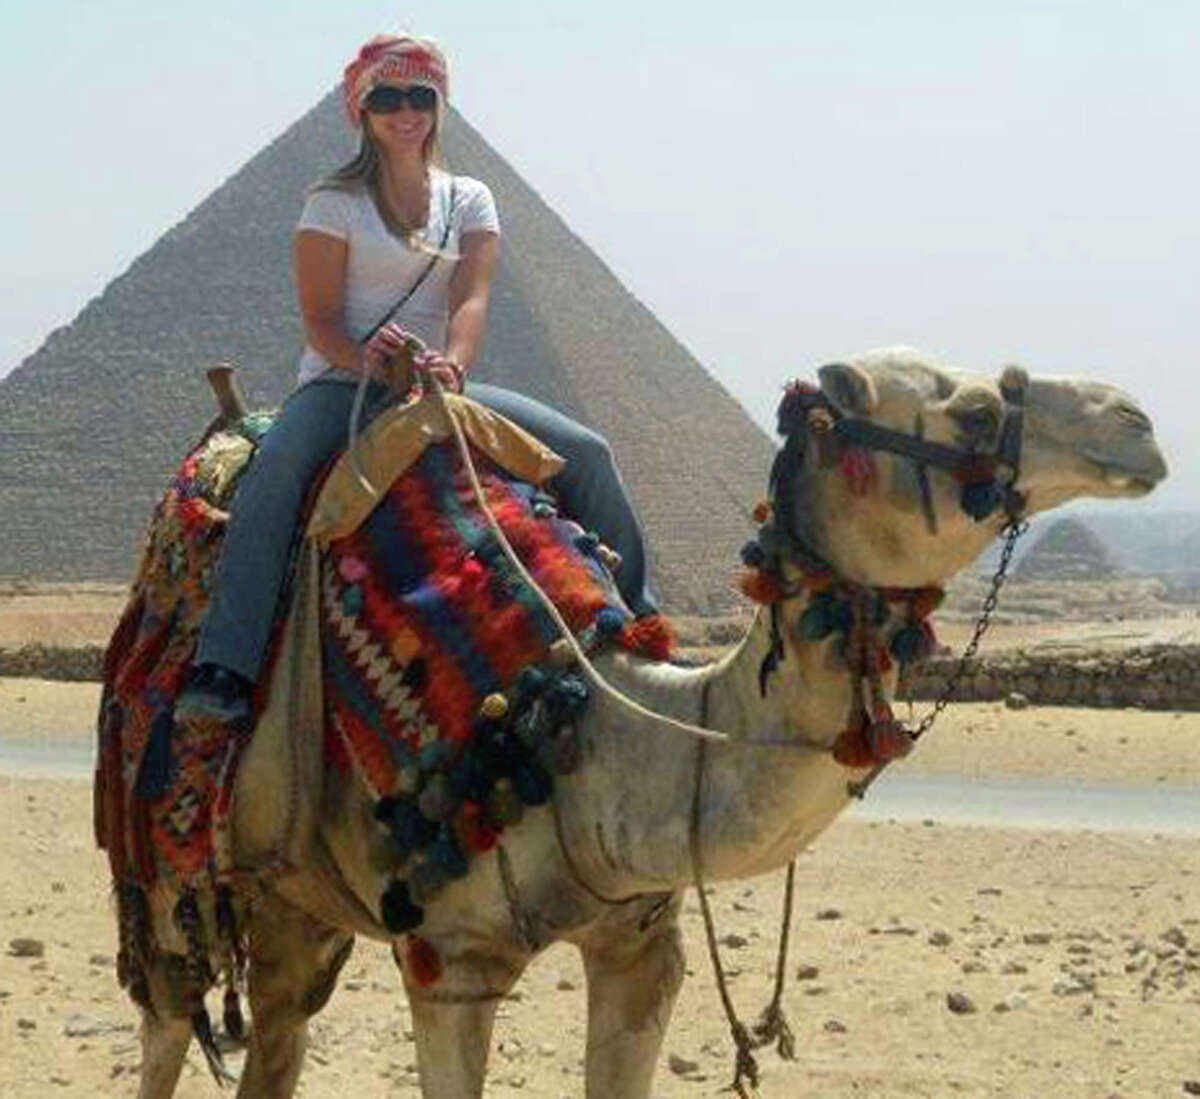 A camel ride proves a high point for Boston University student Alex Hopkins as she experiences the pyramids during her summertime trip to Egypt. July 2012 Courtesy of the Hopkins family